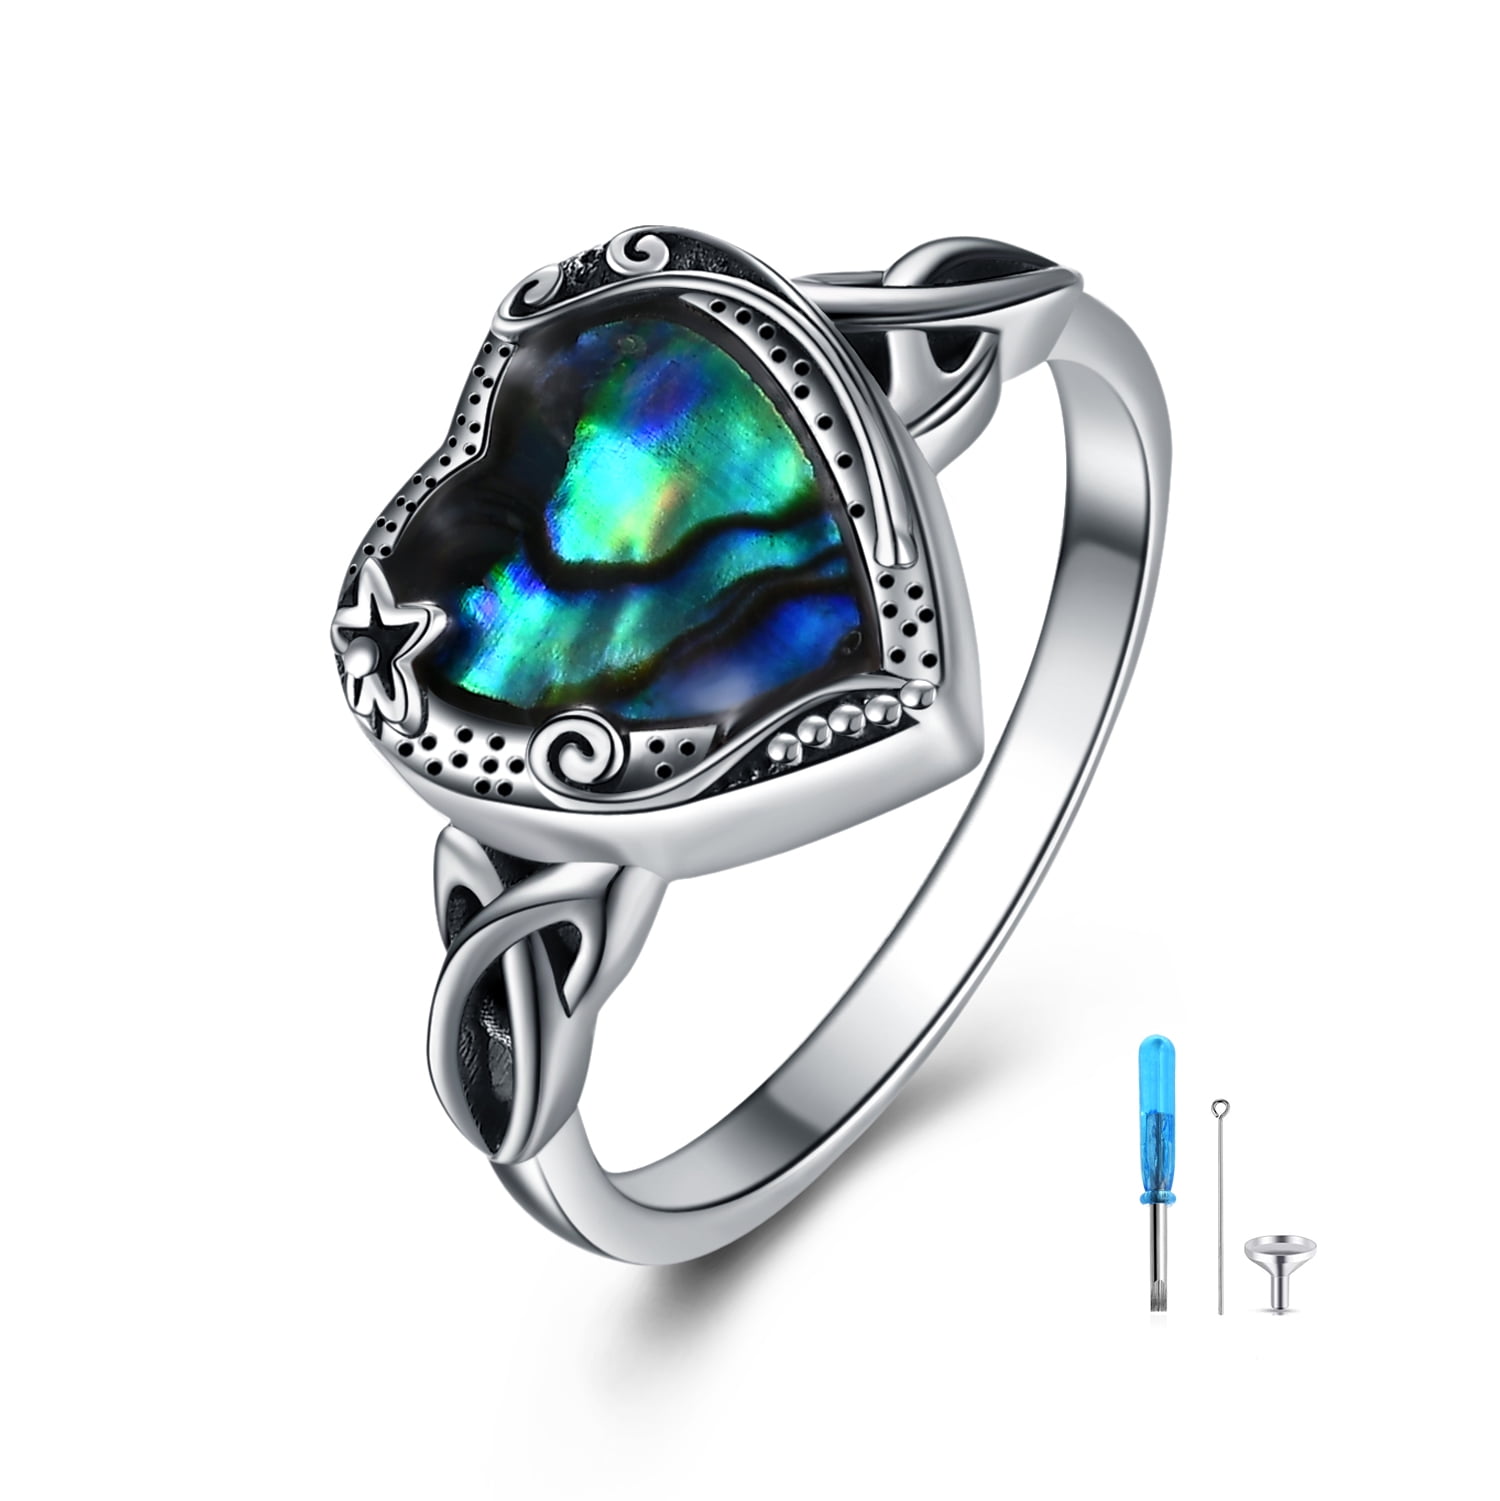 F&F Jewelry Blue & Pink & White Fire Opal Jewelry Wedding Ring For Women Engagement Wedding Bridal Rings